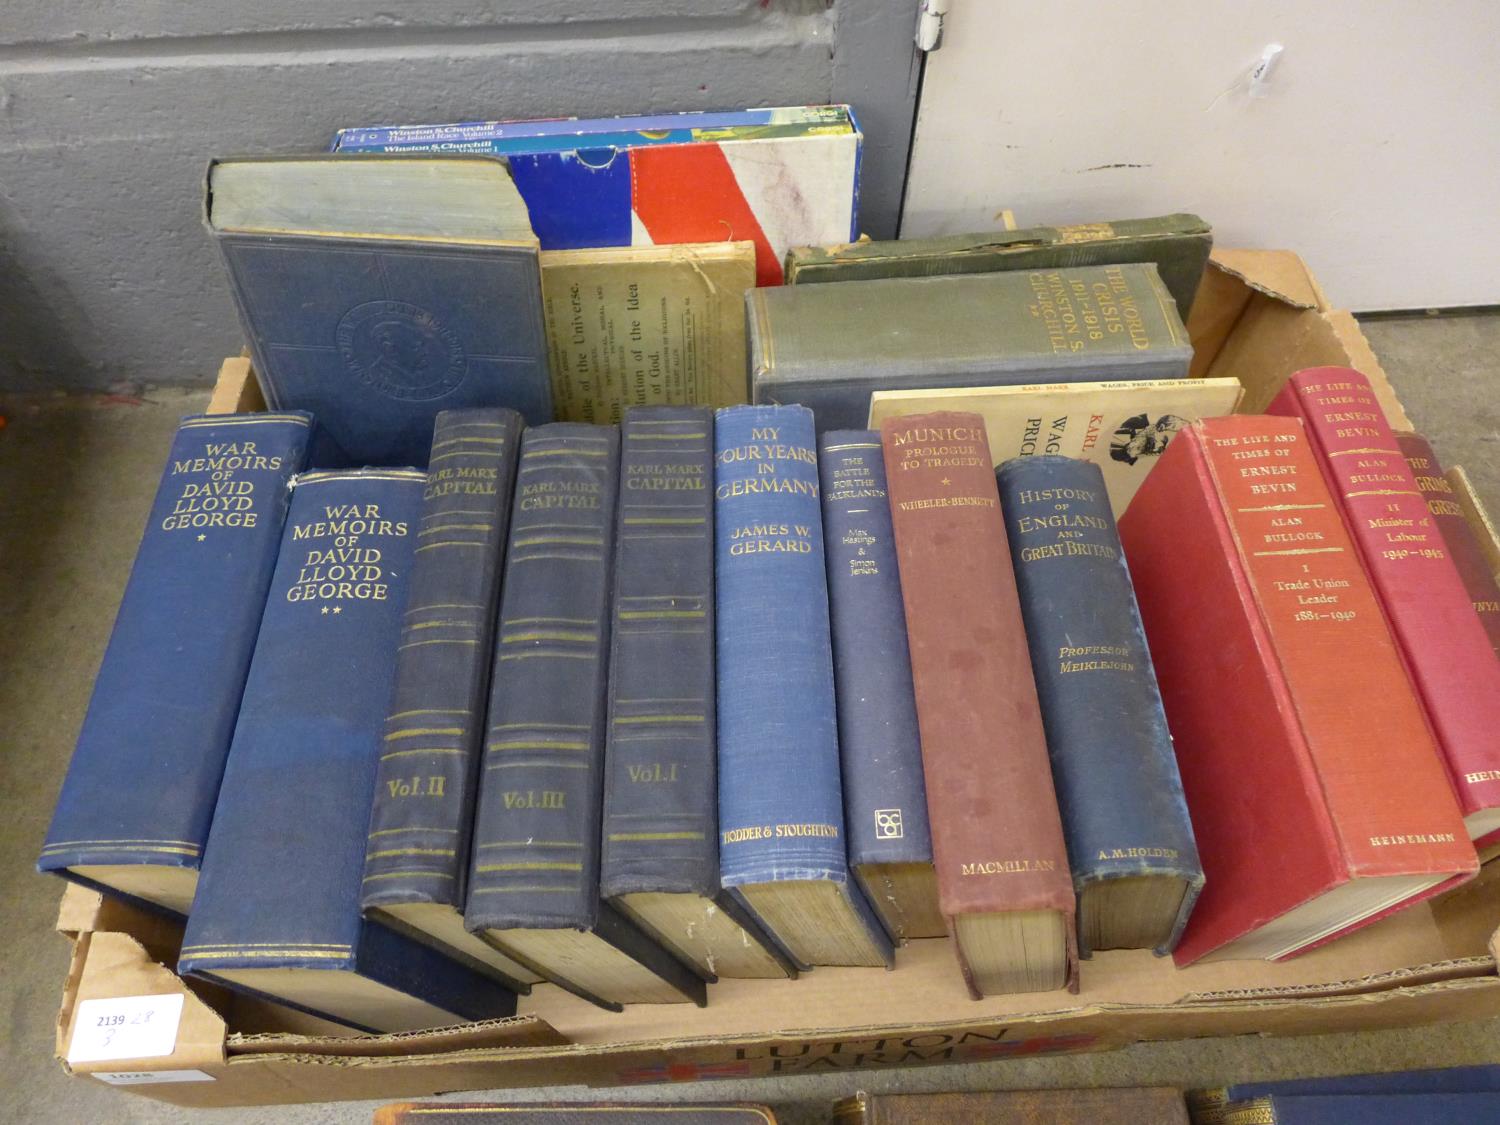 A collection of books including David Lloyd George, Winston Churchill, Ernest Bevin, Karl Marx, - Image 2 of 2